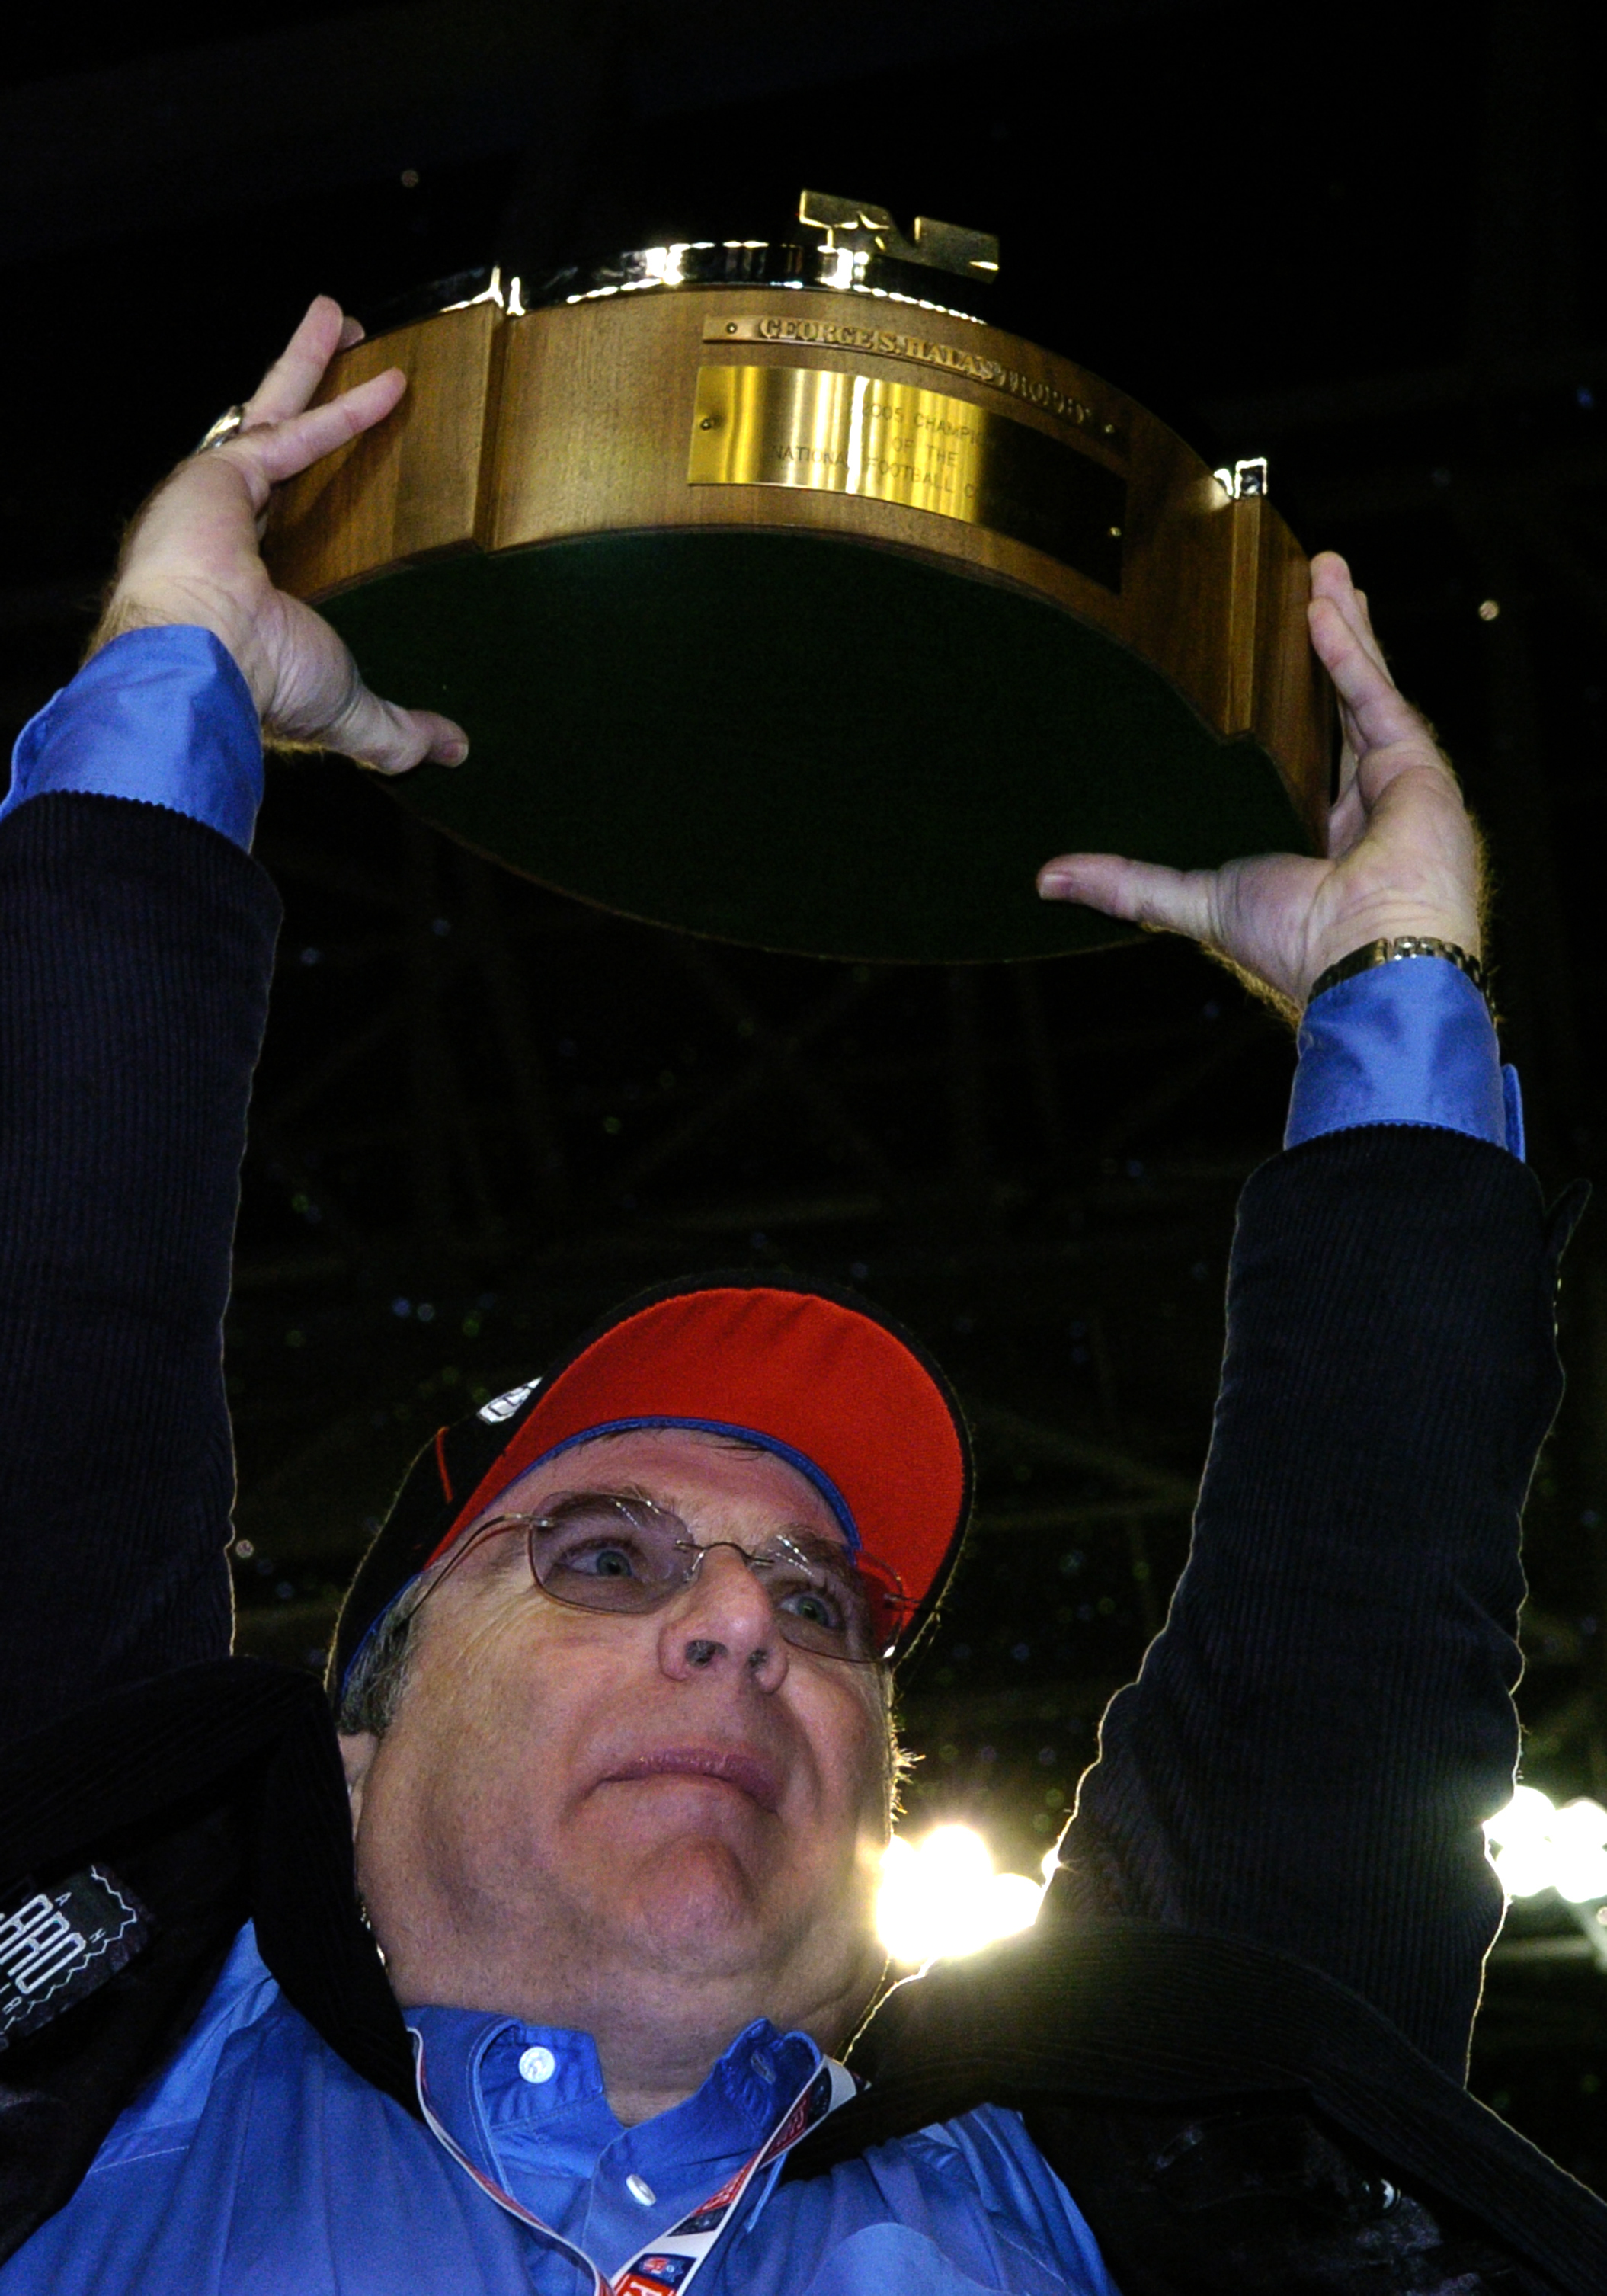 Seattle Seahawks chairman Paul G. Allen  celebrates a victroy over the Carolina Panthers in the NFC Championship game January 22, 2006 in Seattle.  (Photo by Al Messerschmidt/Getty Images)